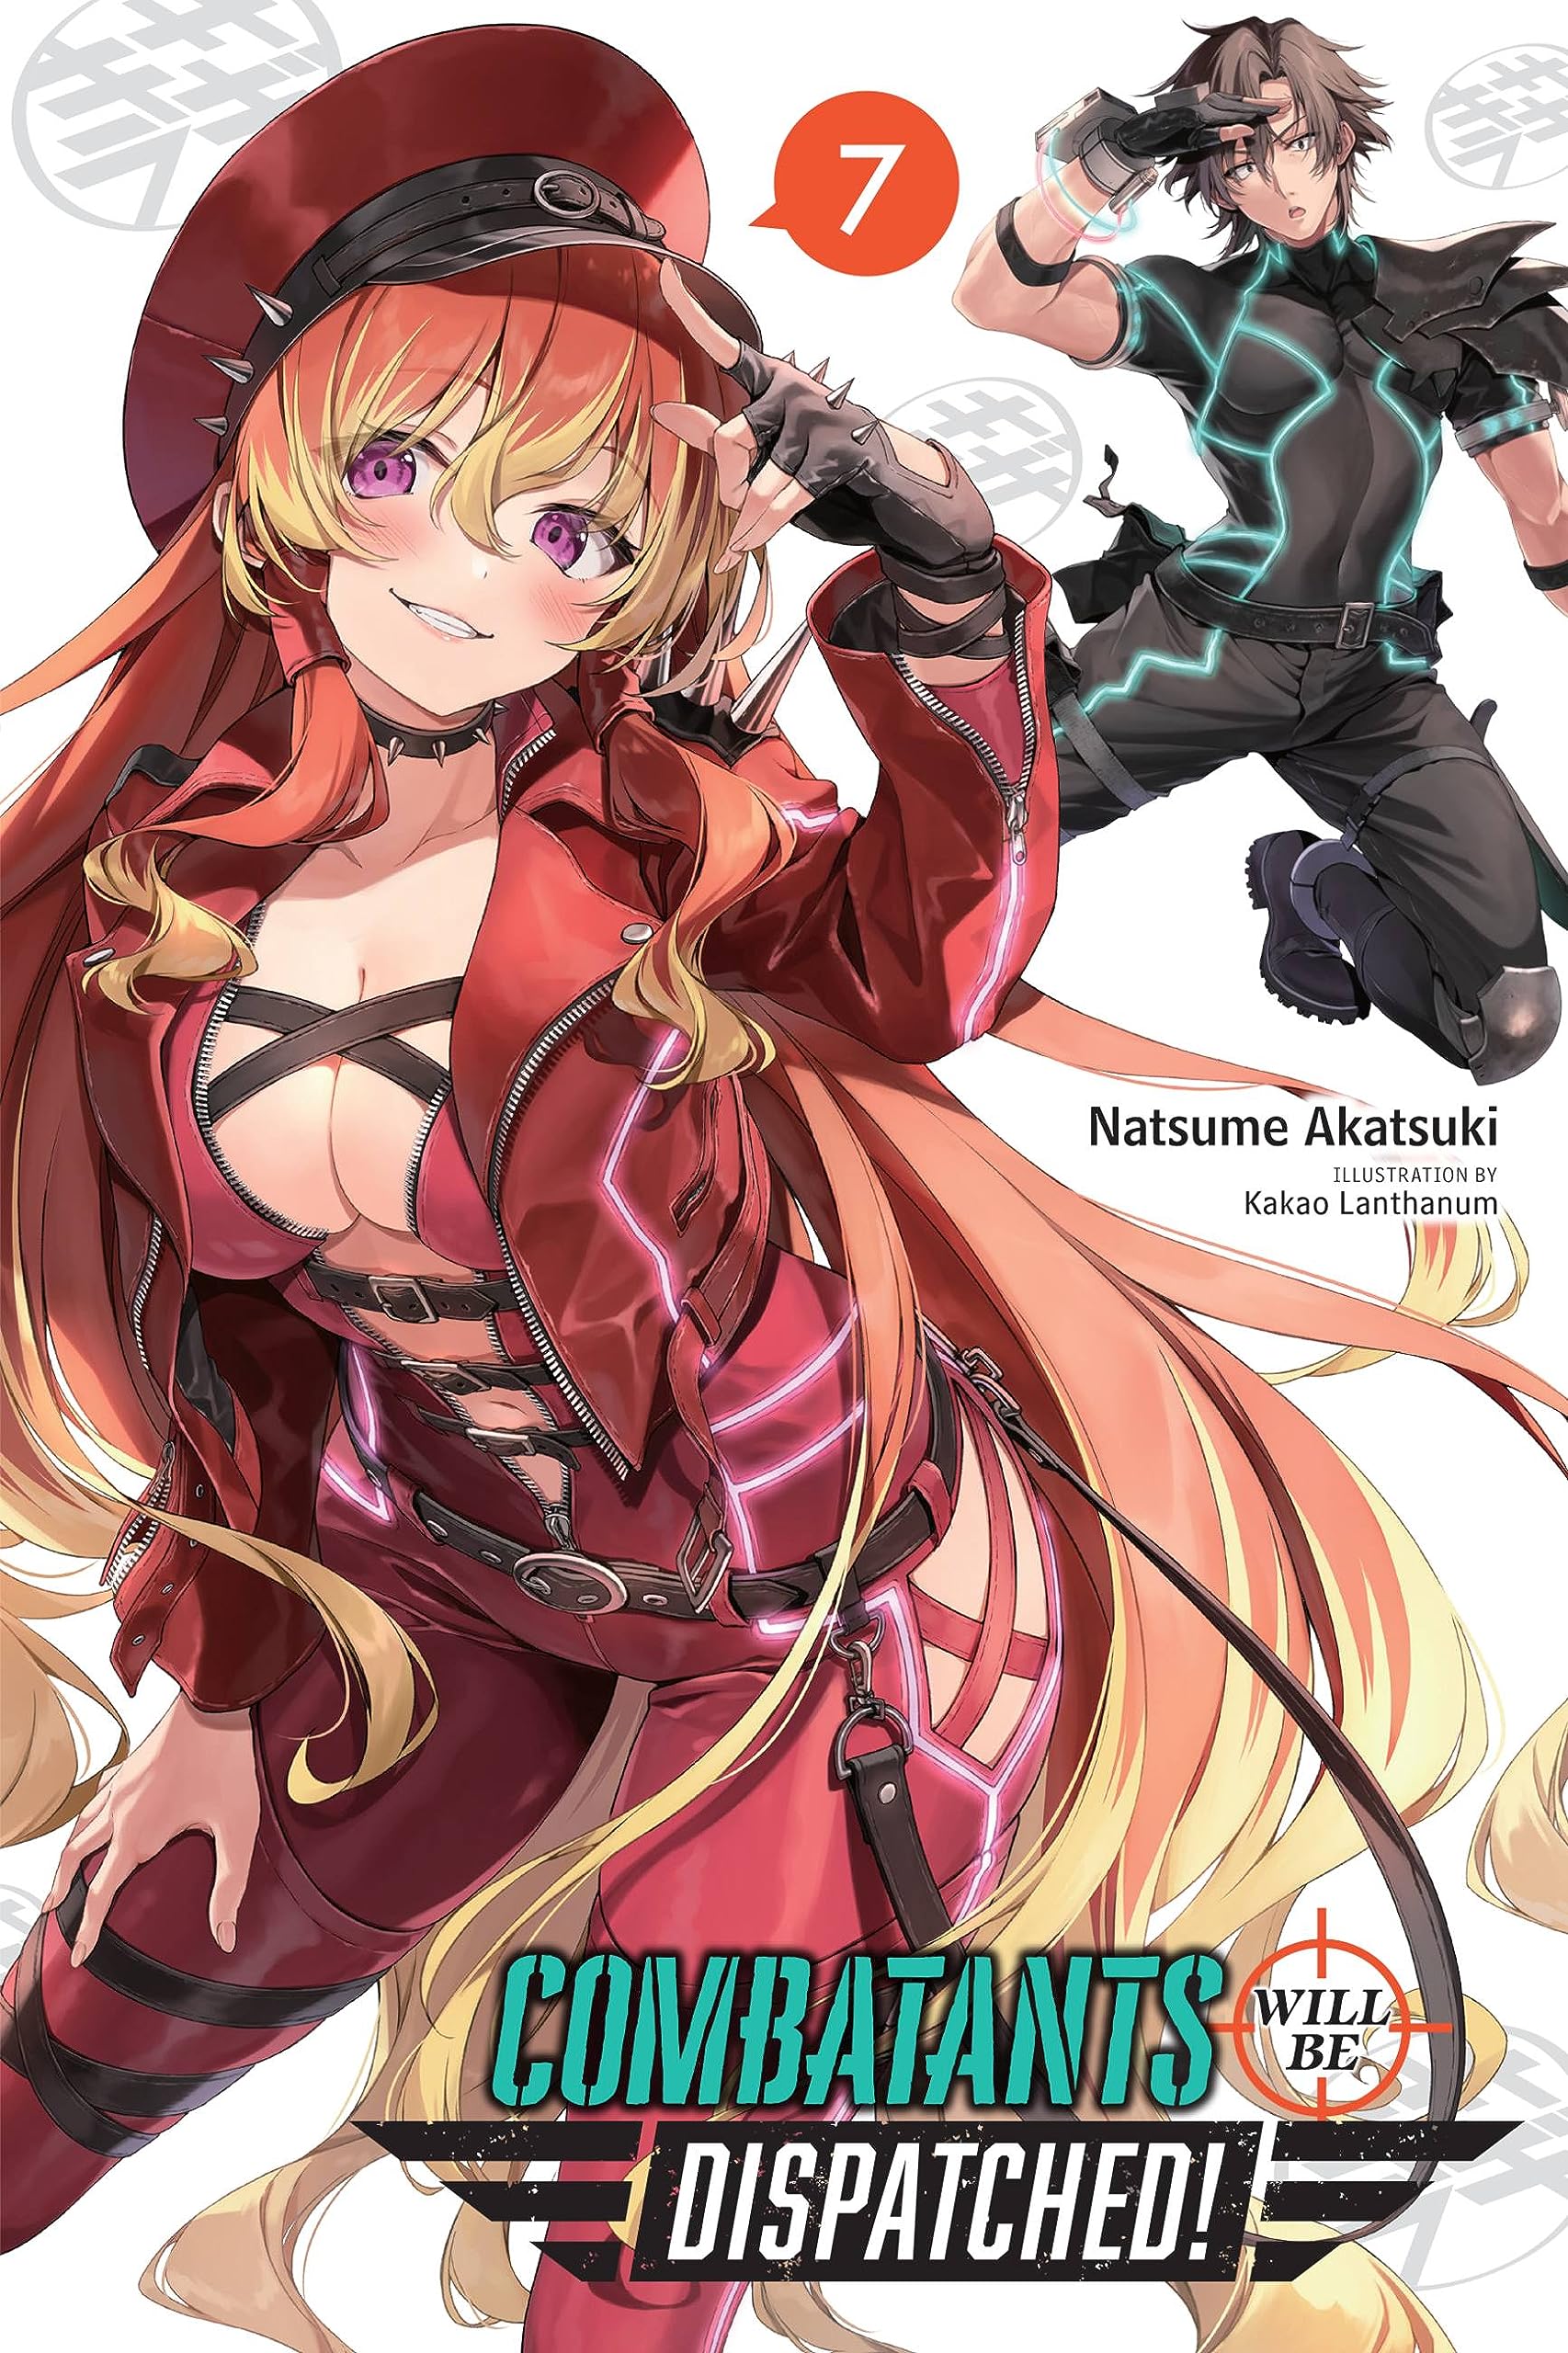 Combatants Will Be Dispatched! Vol. 07 (Light Novel)